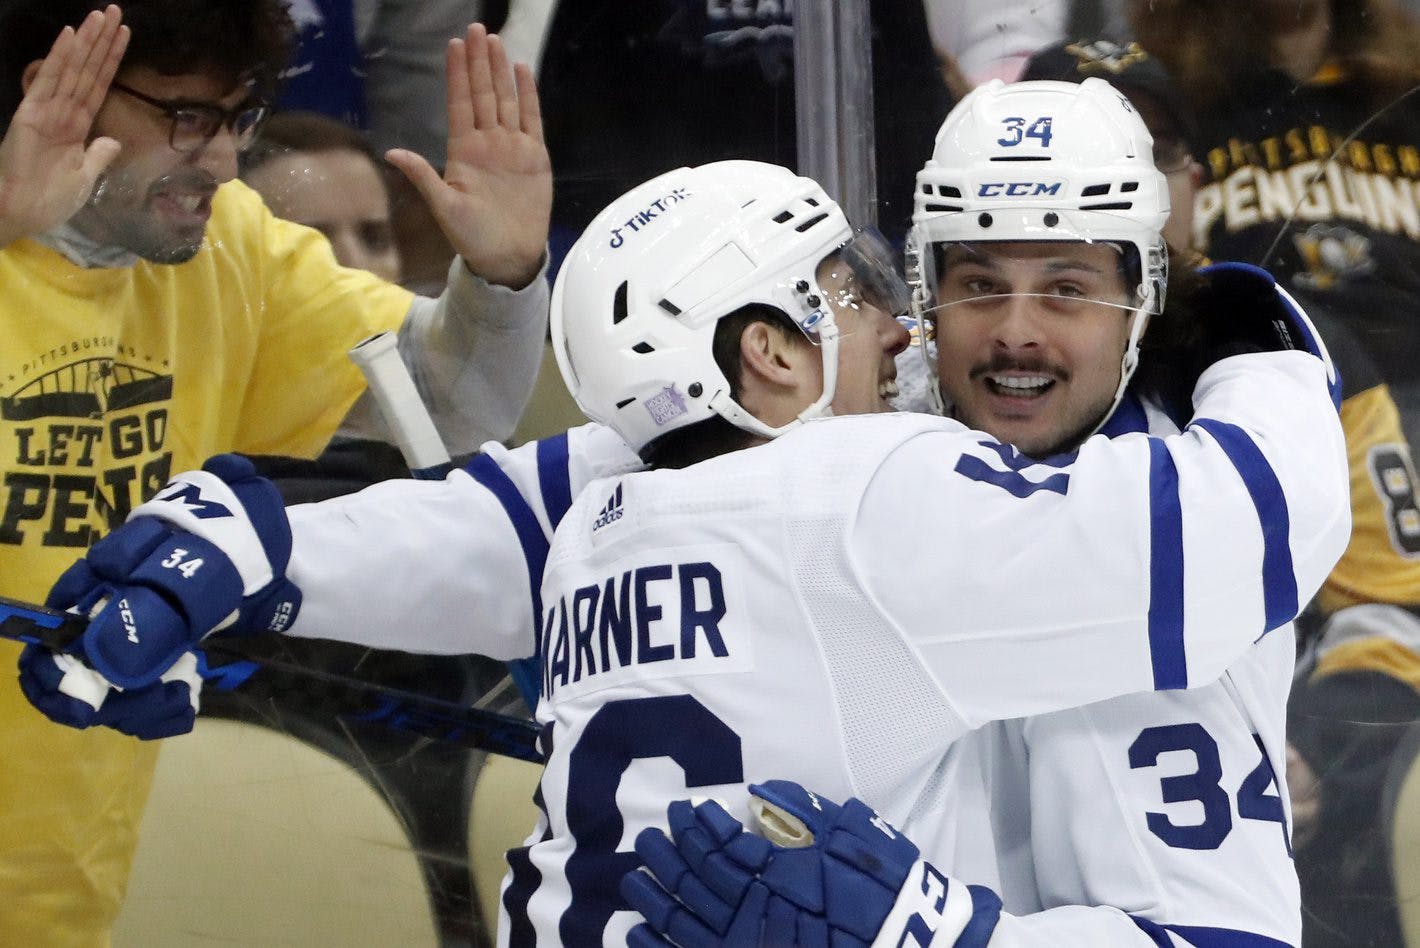 Ranking the Maple Leafs' alternate jerseys from worst to best